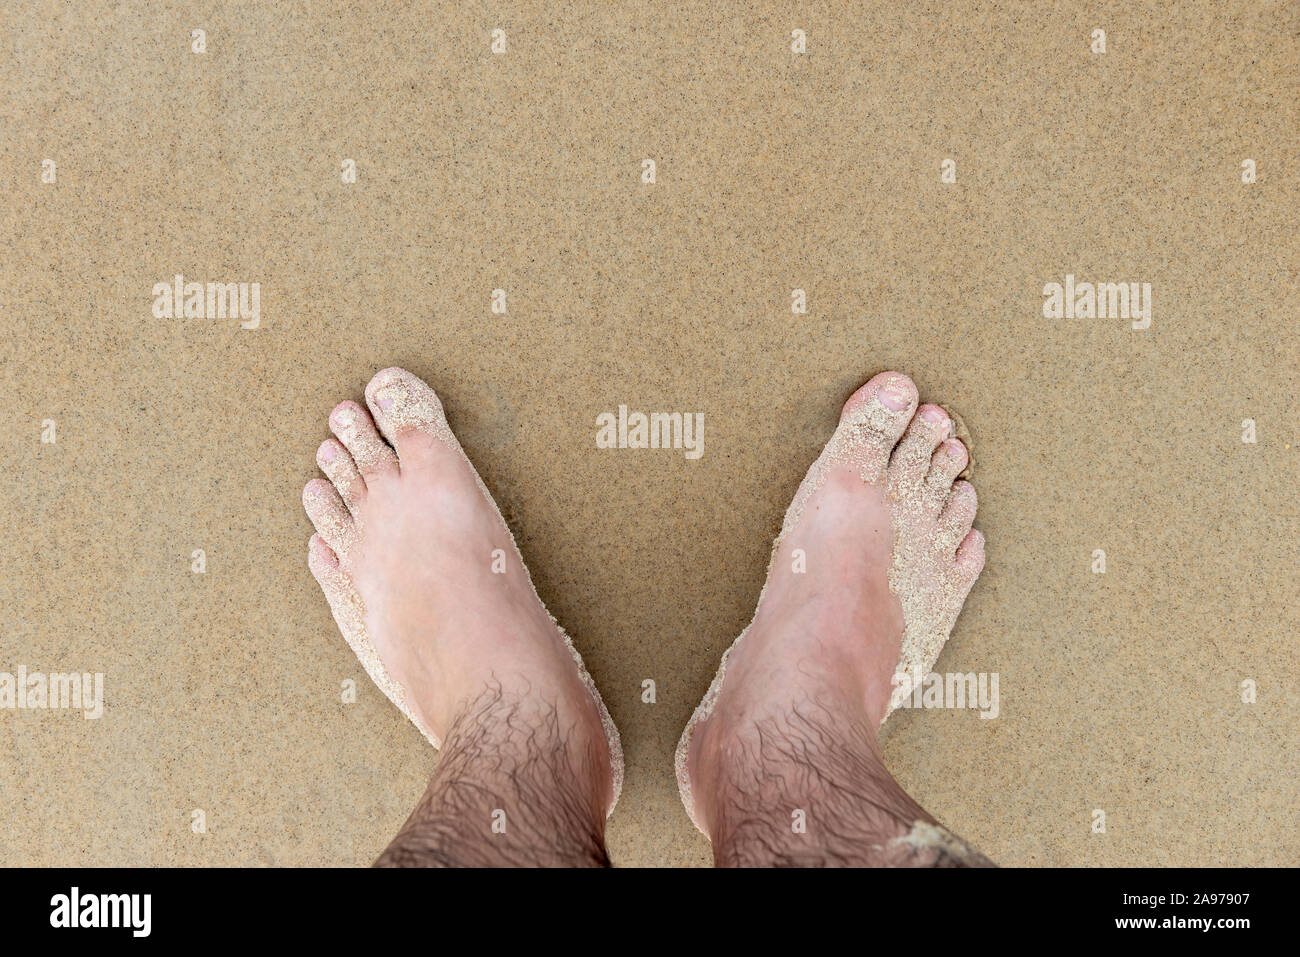 Male feet beach sand holiday middle aged wet vacation smooth legs toes Stock Photo